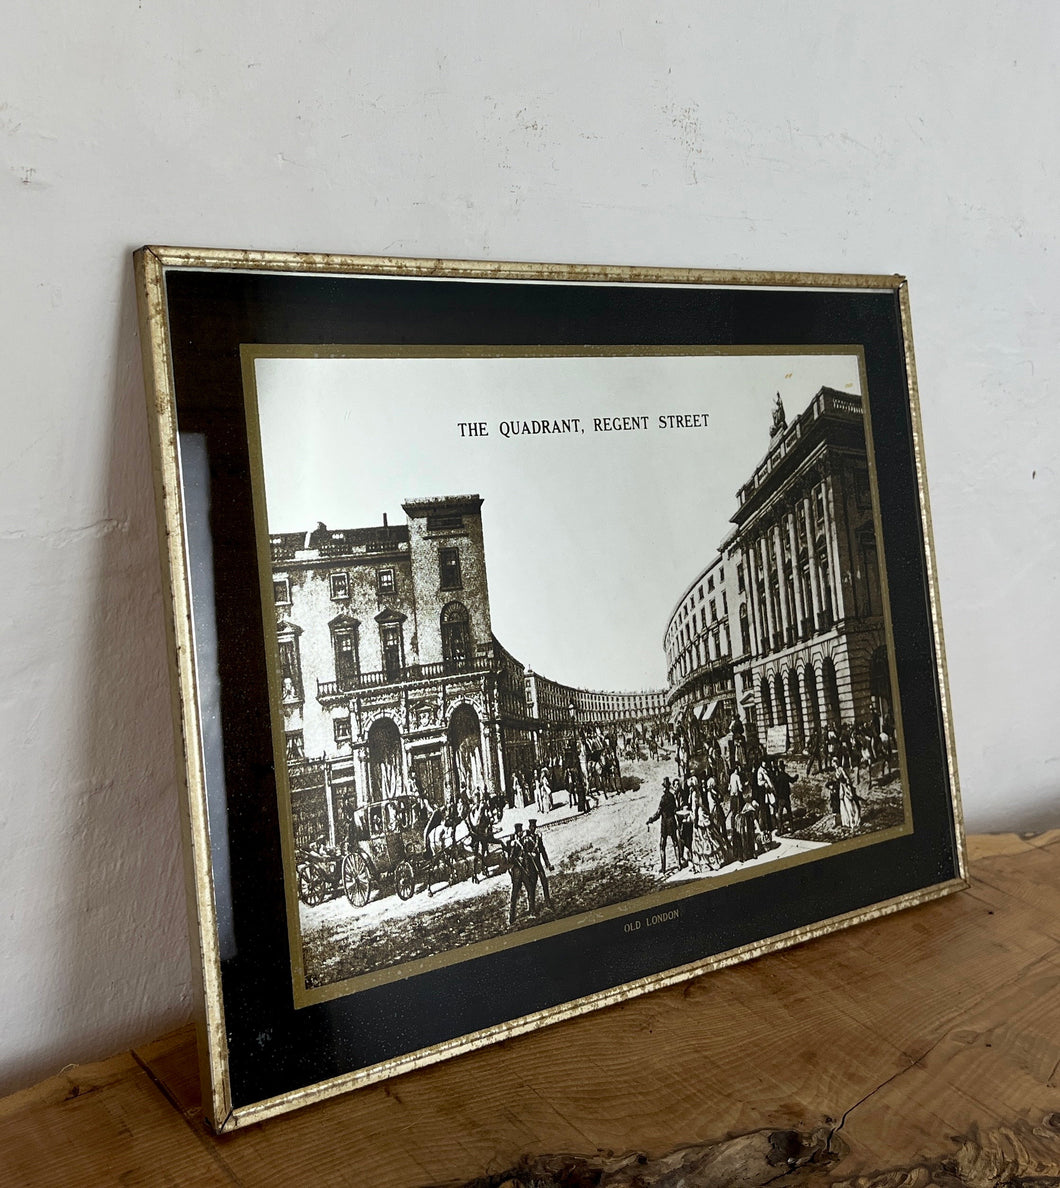 Superb mid-century old London mirror featuring The Quadrant, Regent Street. This marvellous advertising history picture comes in black and white with exquisite intricate detail on the landmark, a fantastic tourism collectable with bold fonts.